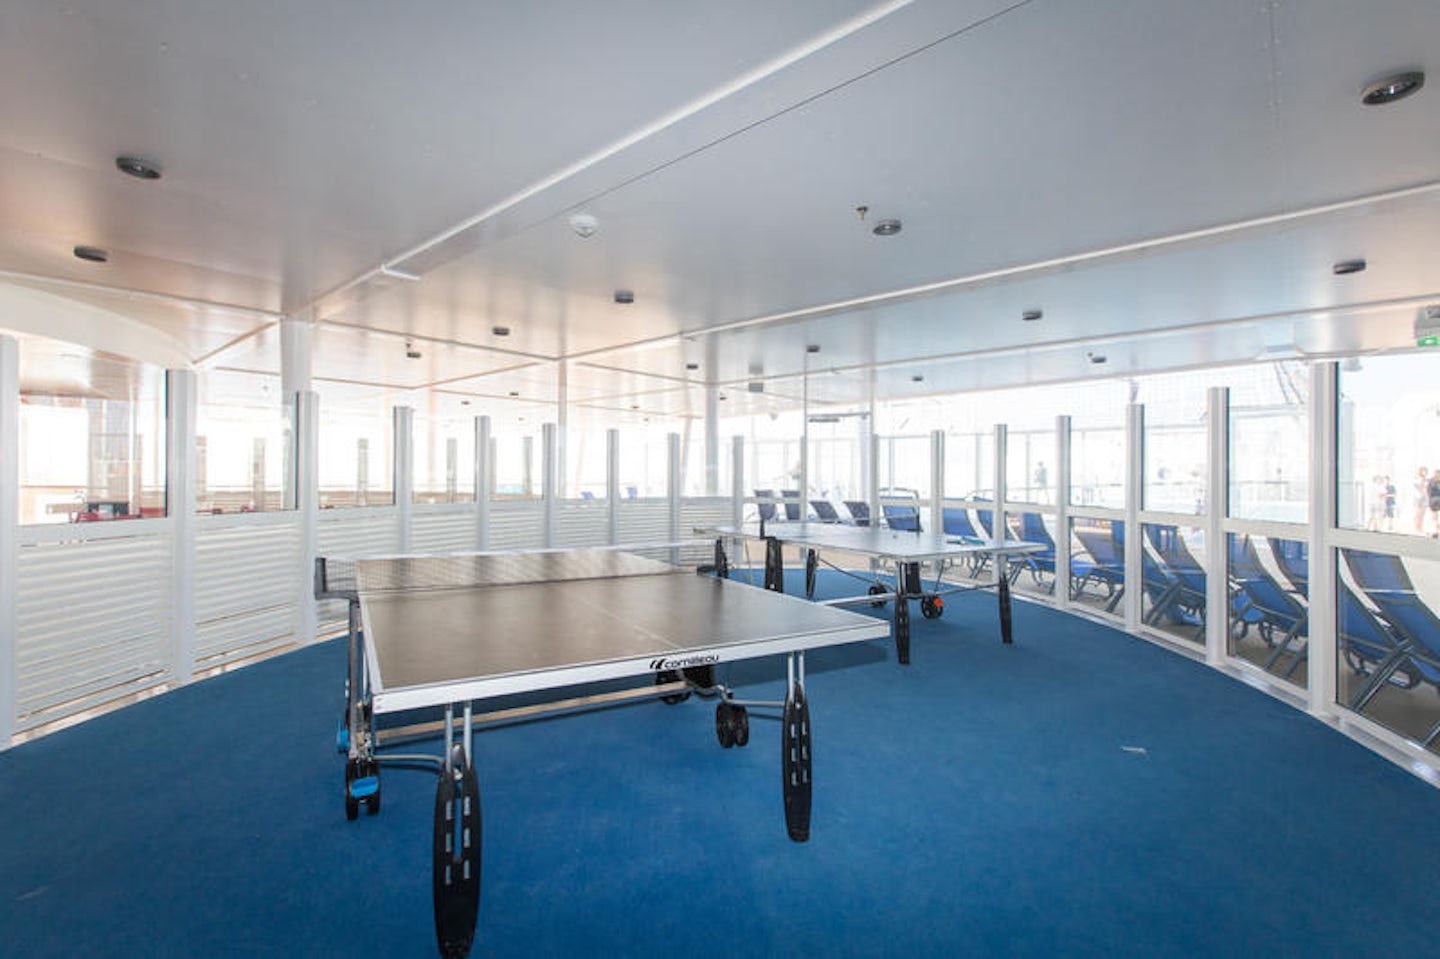 Ping Pong Tables on Harmony of the Seas